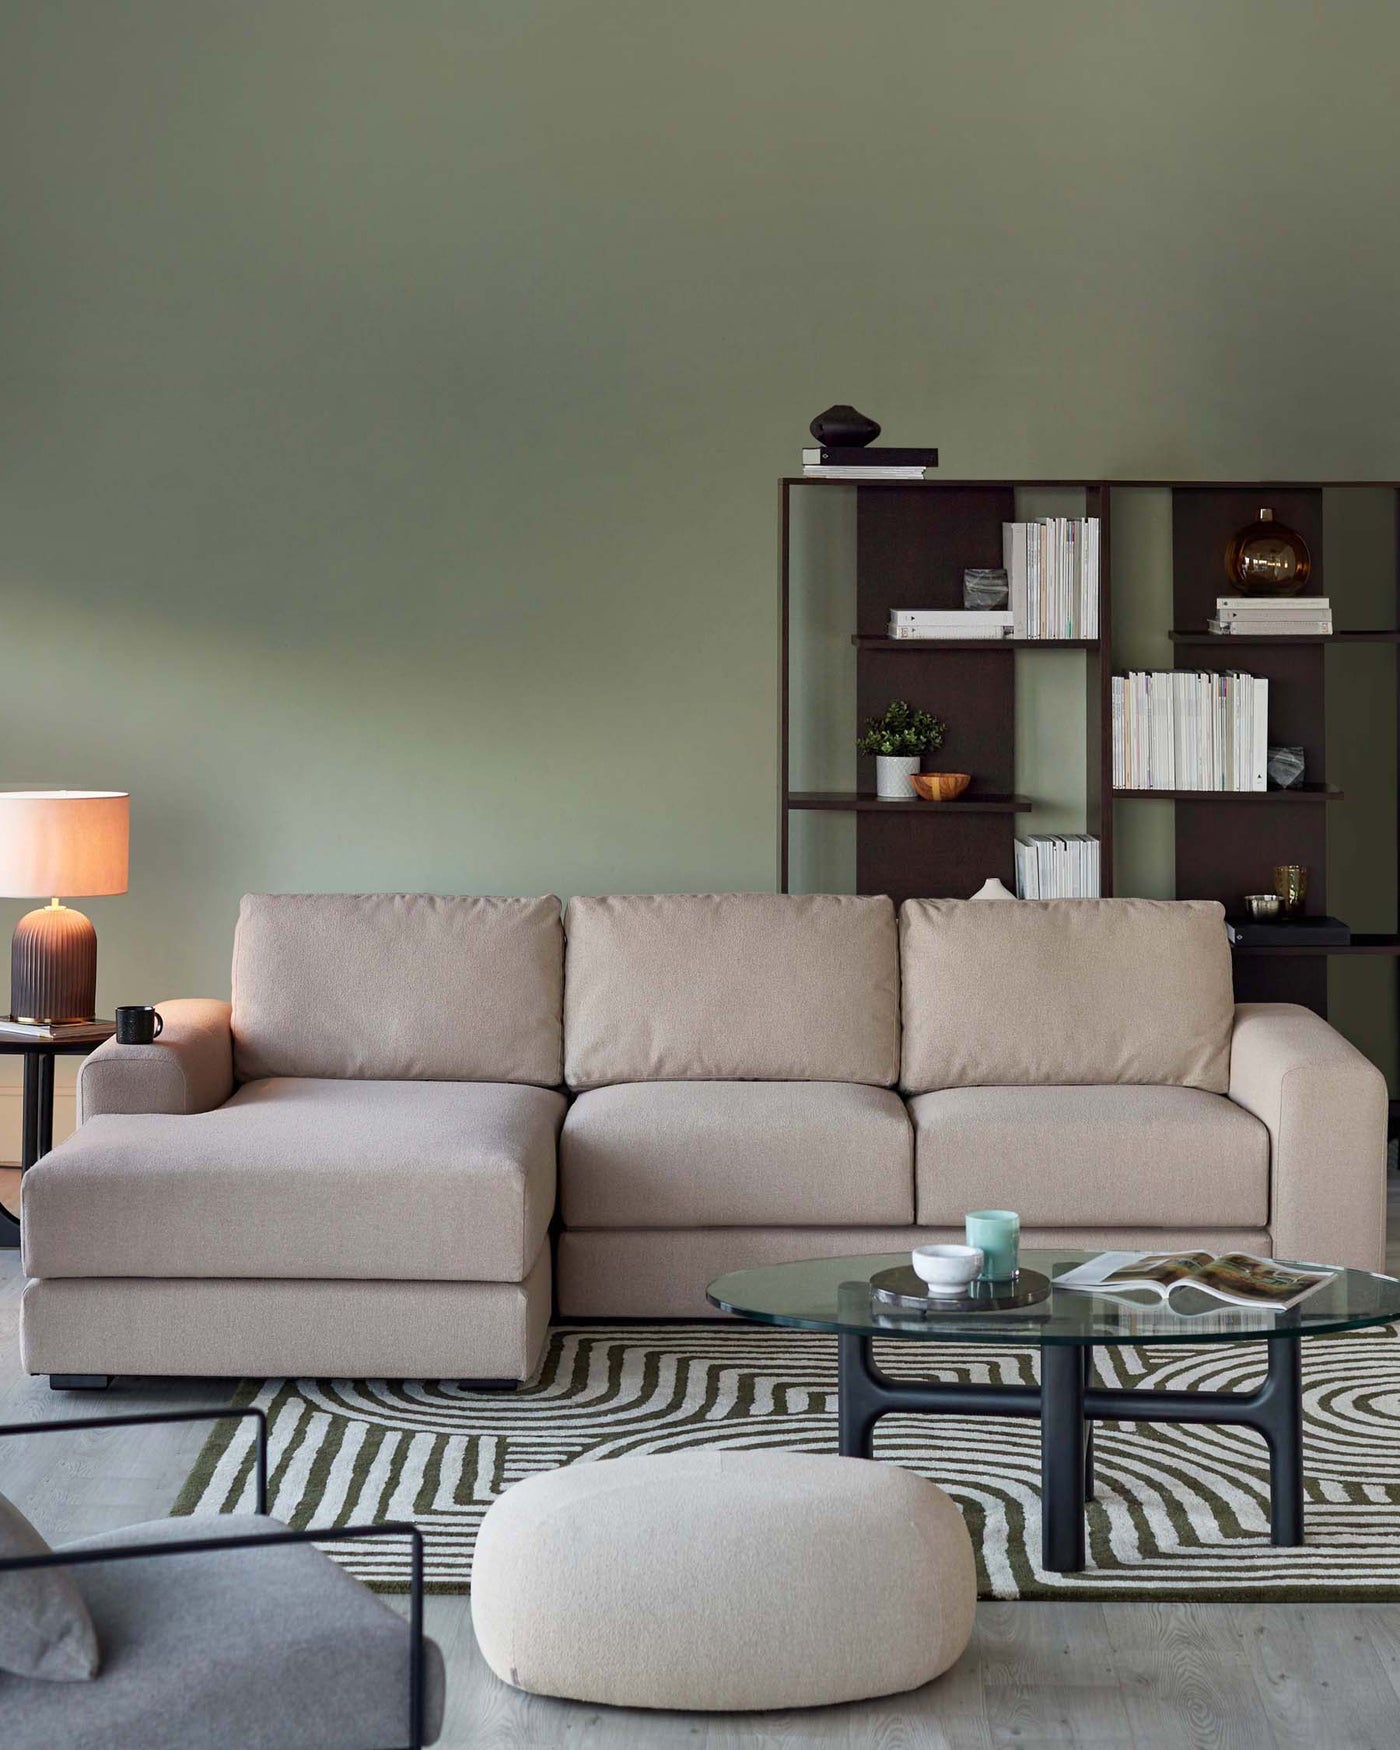 Modern living room furniture arrangement featuring a beige upholstered sectional sofa with a chaise, a round glass-top coffee table with a black frame, a dark brown shelving unit filled with books and decorative items, a beige fabric oval ottoman, a table lamp with a white shade, and a patterned area rug with green and beige tones.